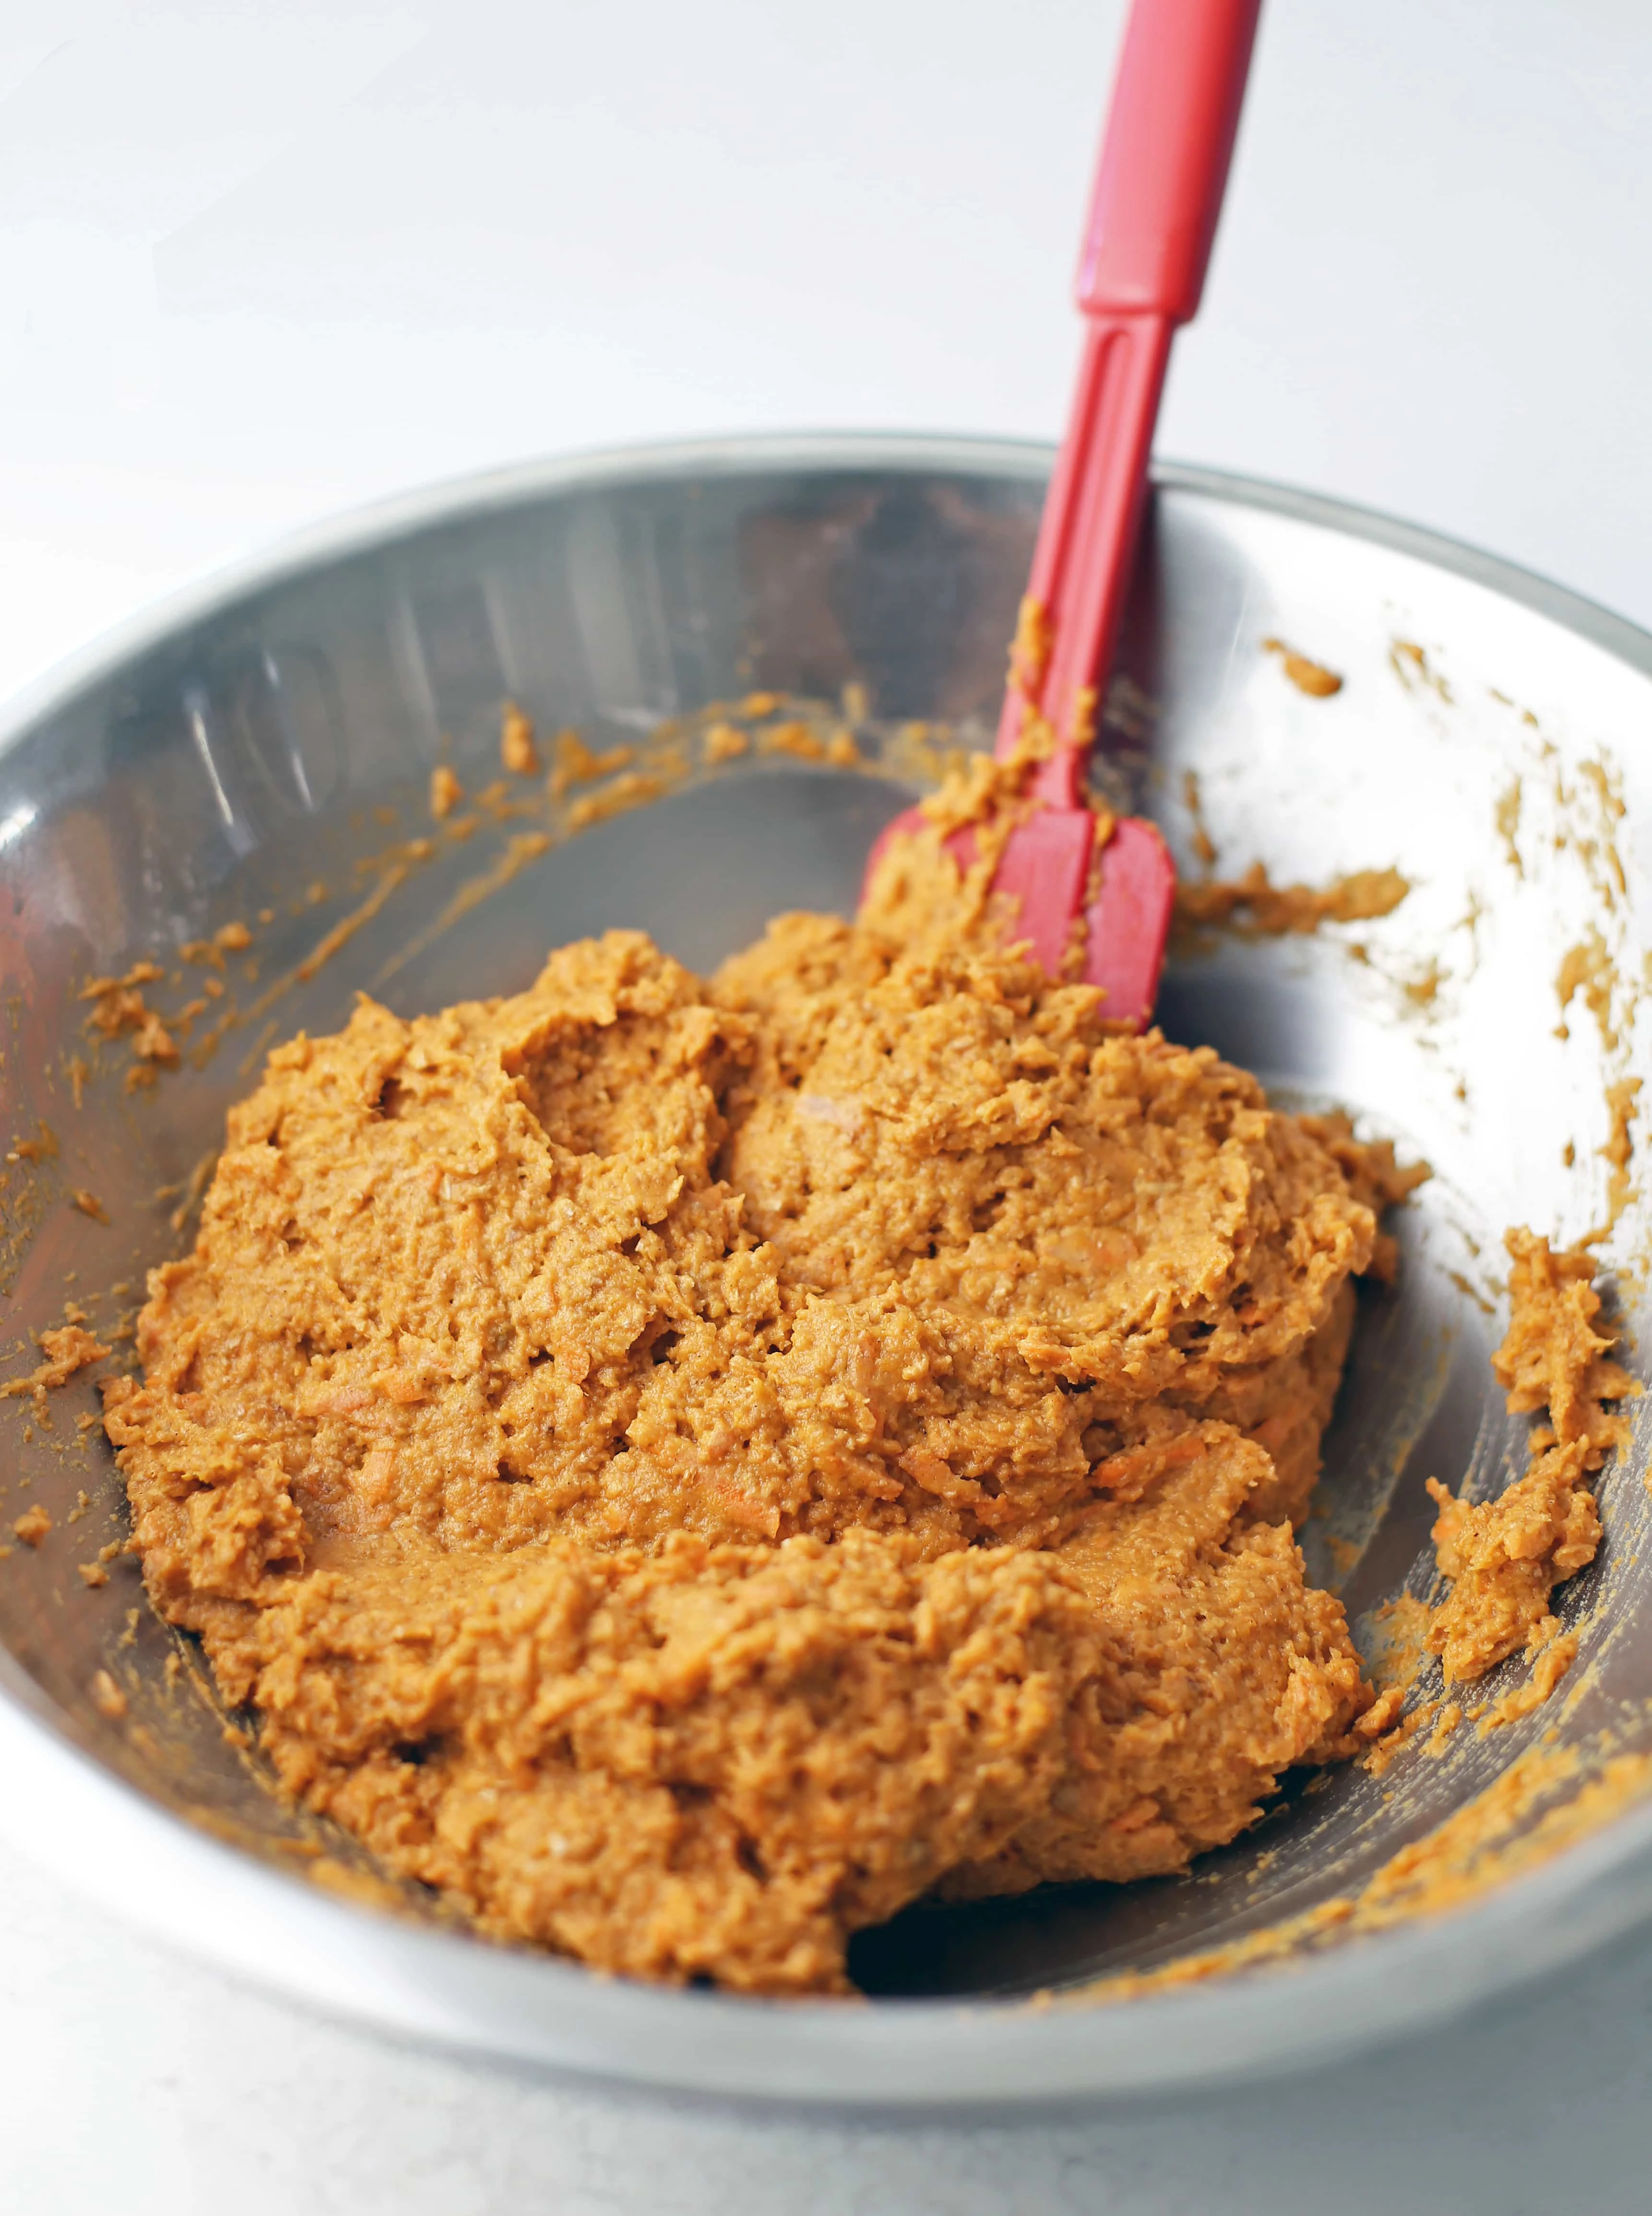 Carrot pumpkin muffin batter mixed together with a spatula in a stainless steel bowl.